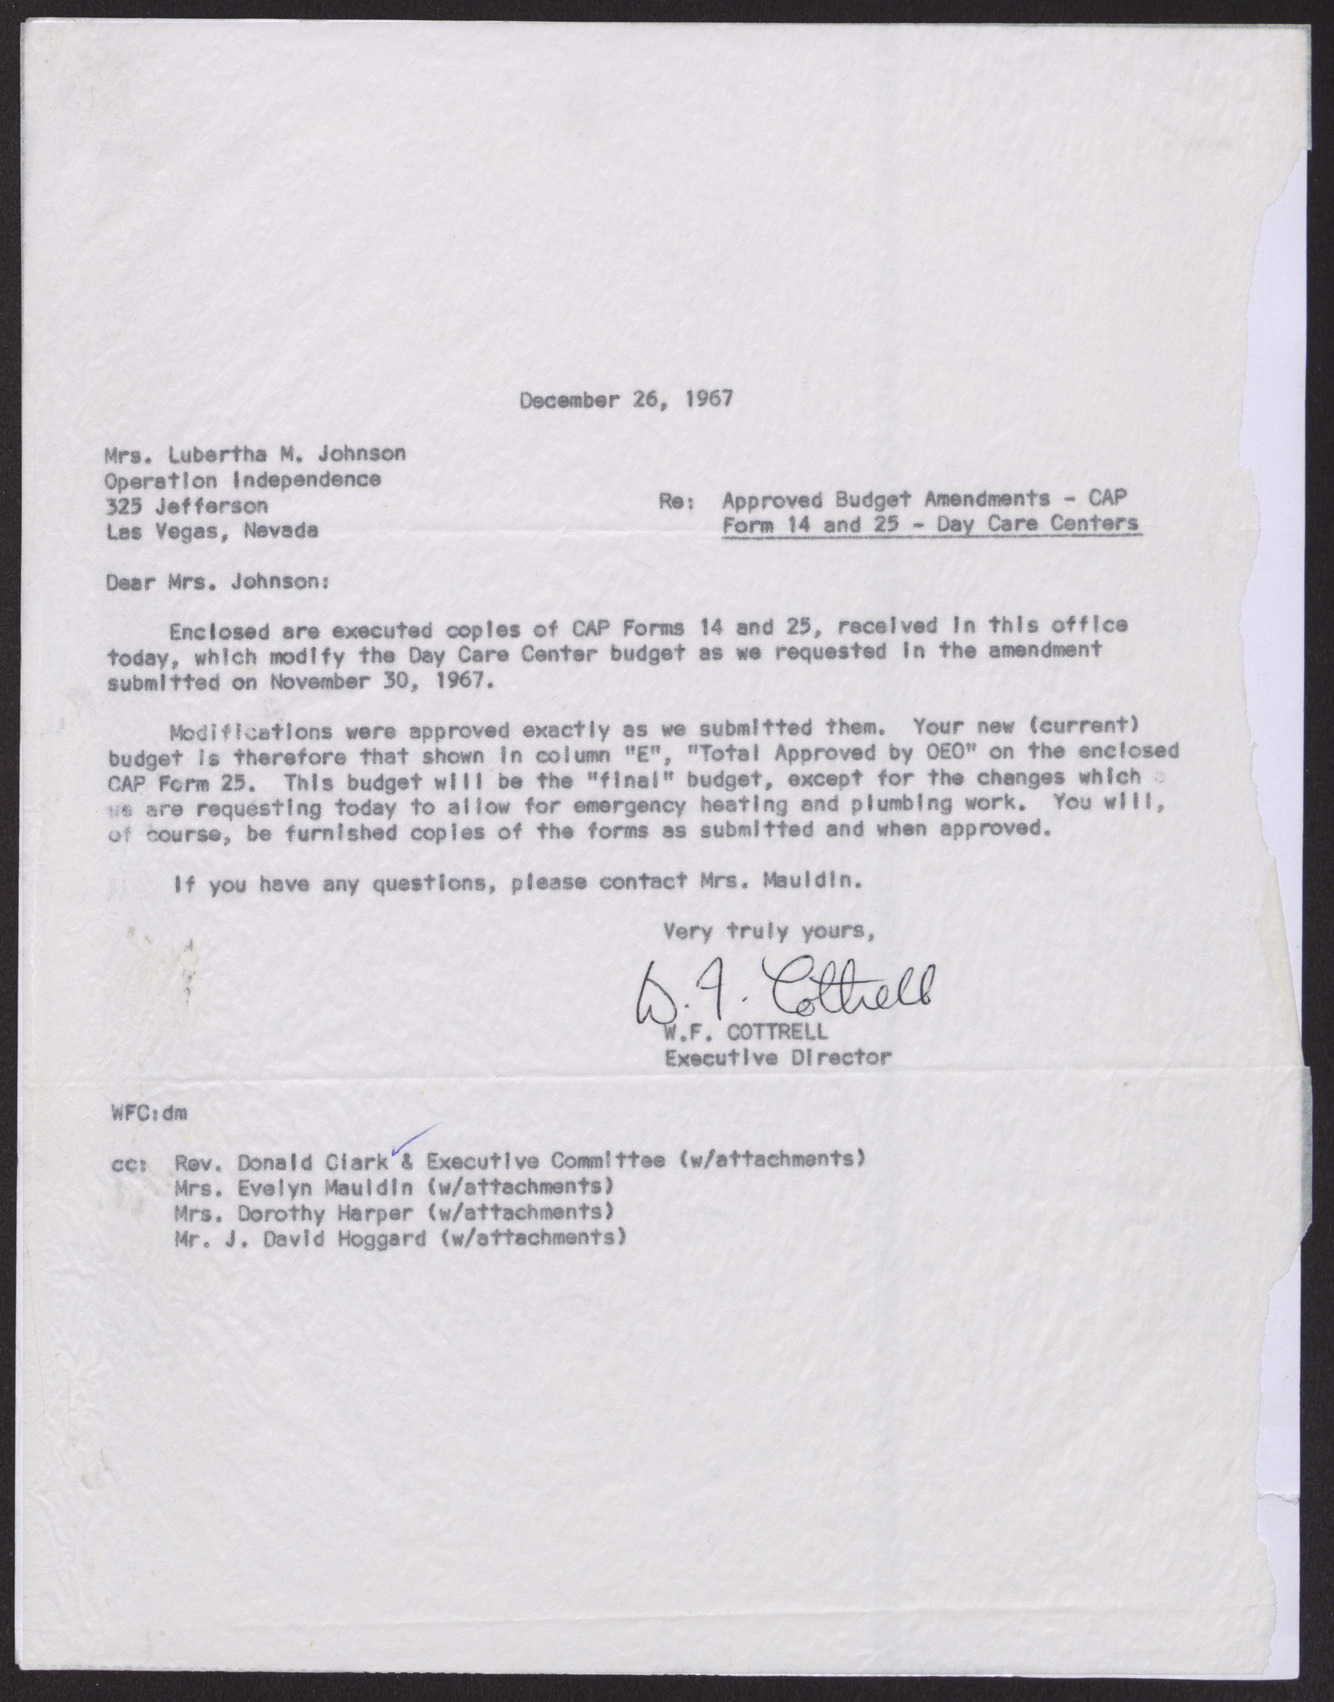 Letter to Mrs. Lubertha Johnson from W. F. Cottrell, December 26, 1967